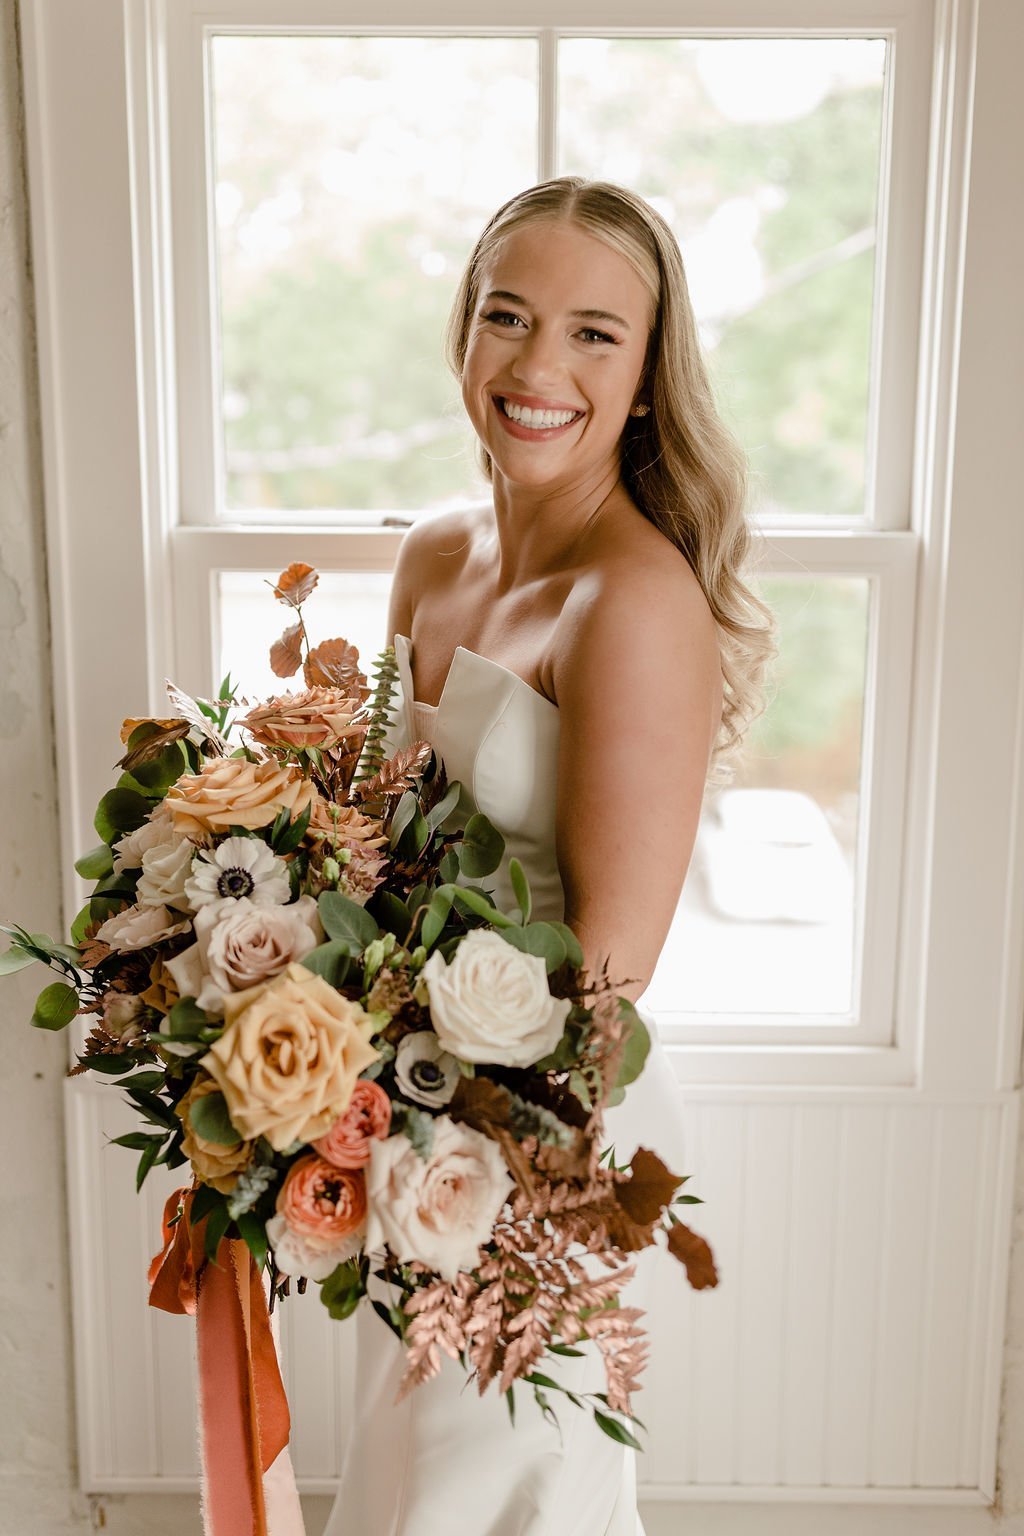 ivory-and-beau-couple-caroline-and-zachs-rustic-and-romantic-spring-wedding-at-victory-north-in-savannah-georgia-planned-by-savannah-wedding-planner-ivory-and-beau-with-wedding-florals-designe-by-savannah-florist-ivory-and-beau-13.jpg